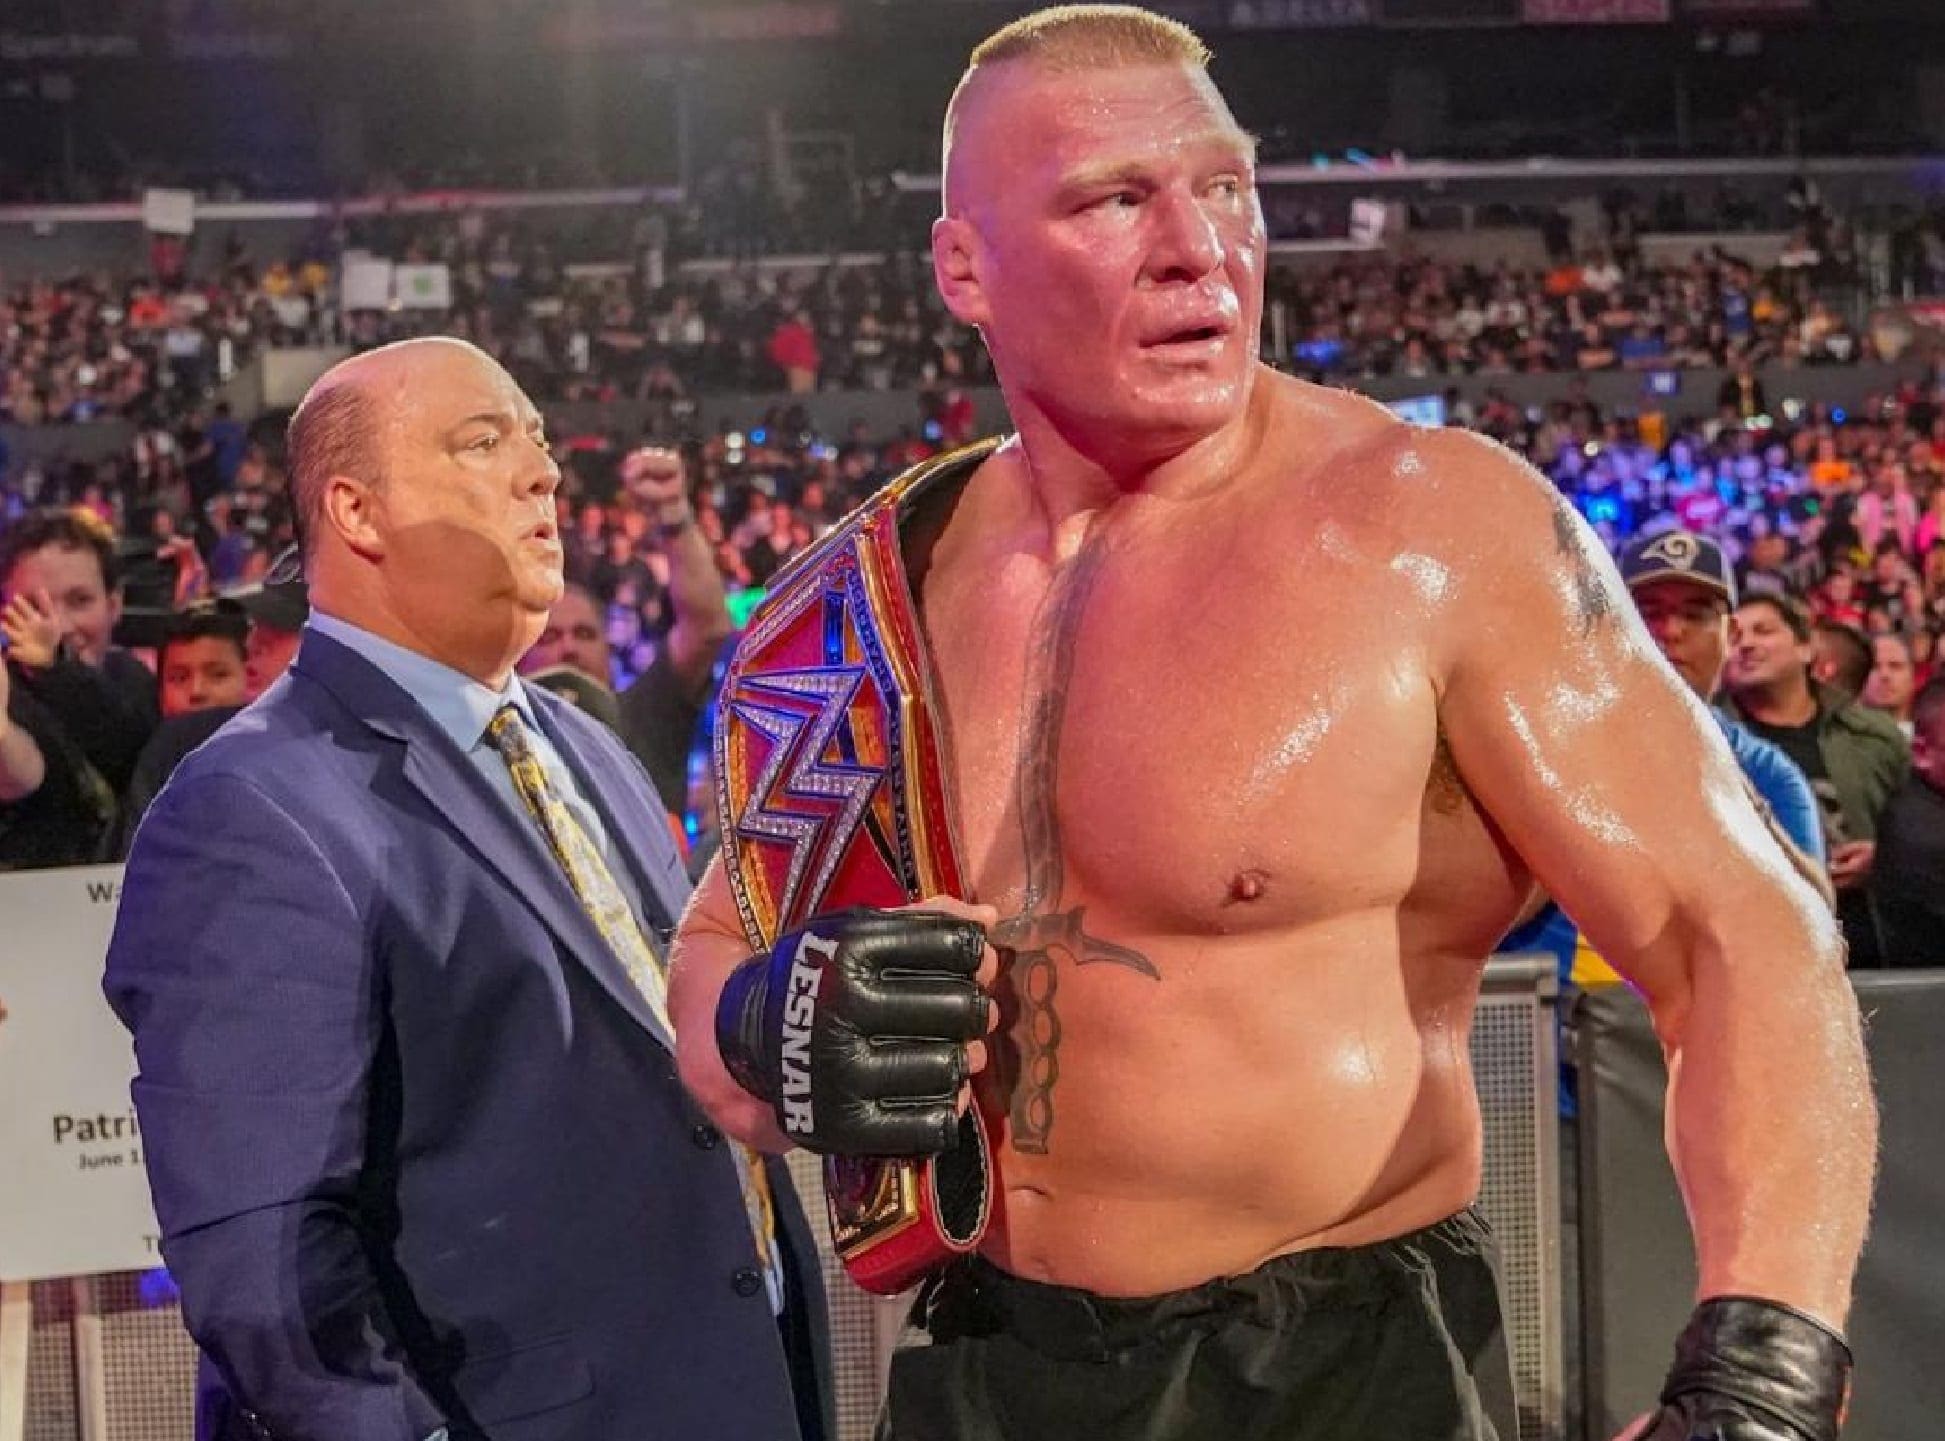 Why Brock Lesnar’s Ring Attire Was Recently Altered